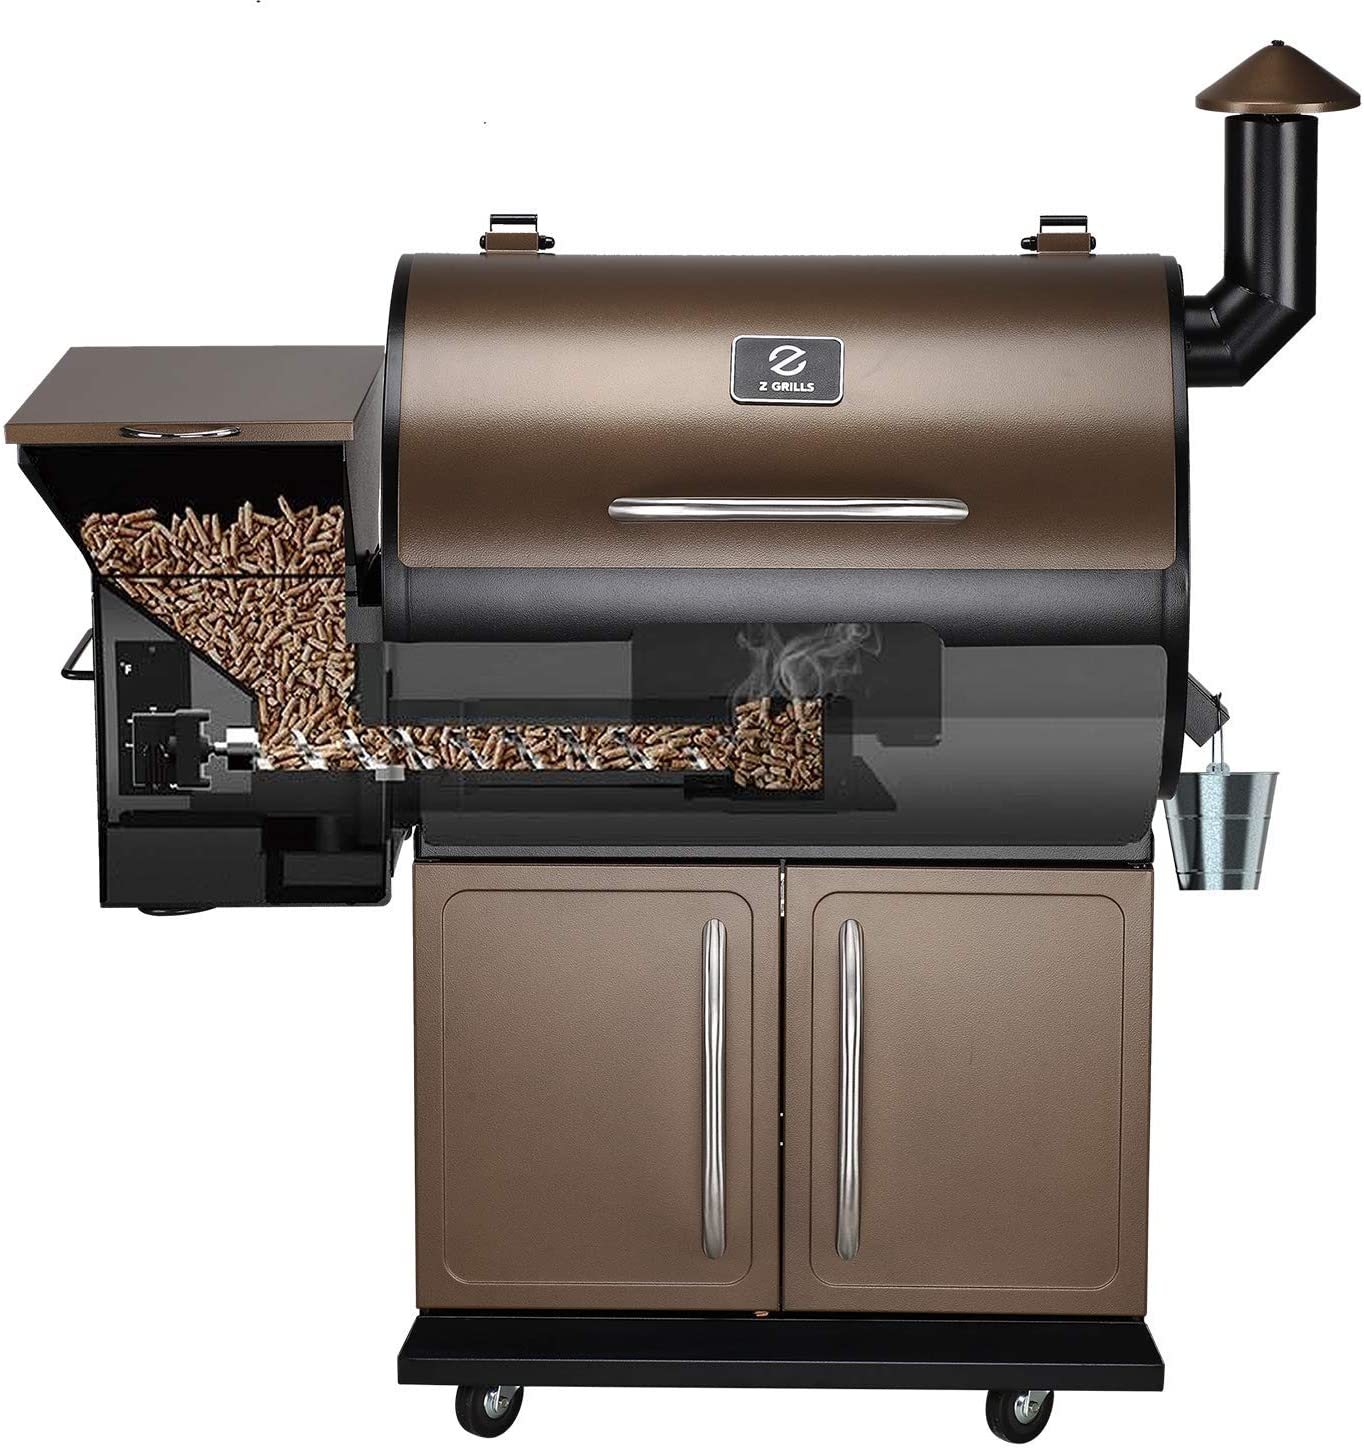 Z Grills 700DPro Wood Pellet Grill with Wireless Meat Probe Thermometer Free, 700 sq in Outdoor Cooking BBQ Smoker, 8 in 1 Smart Barbecue Grill - image 3 of 9